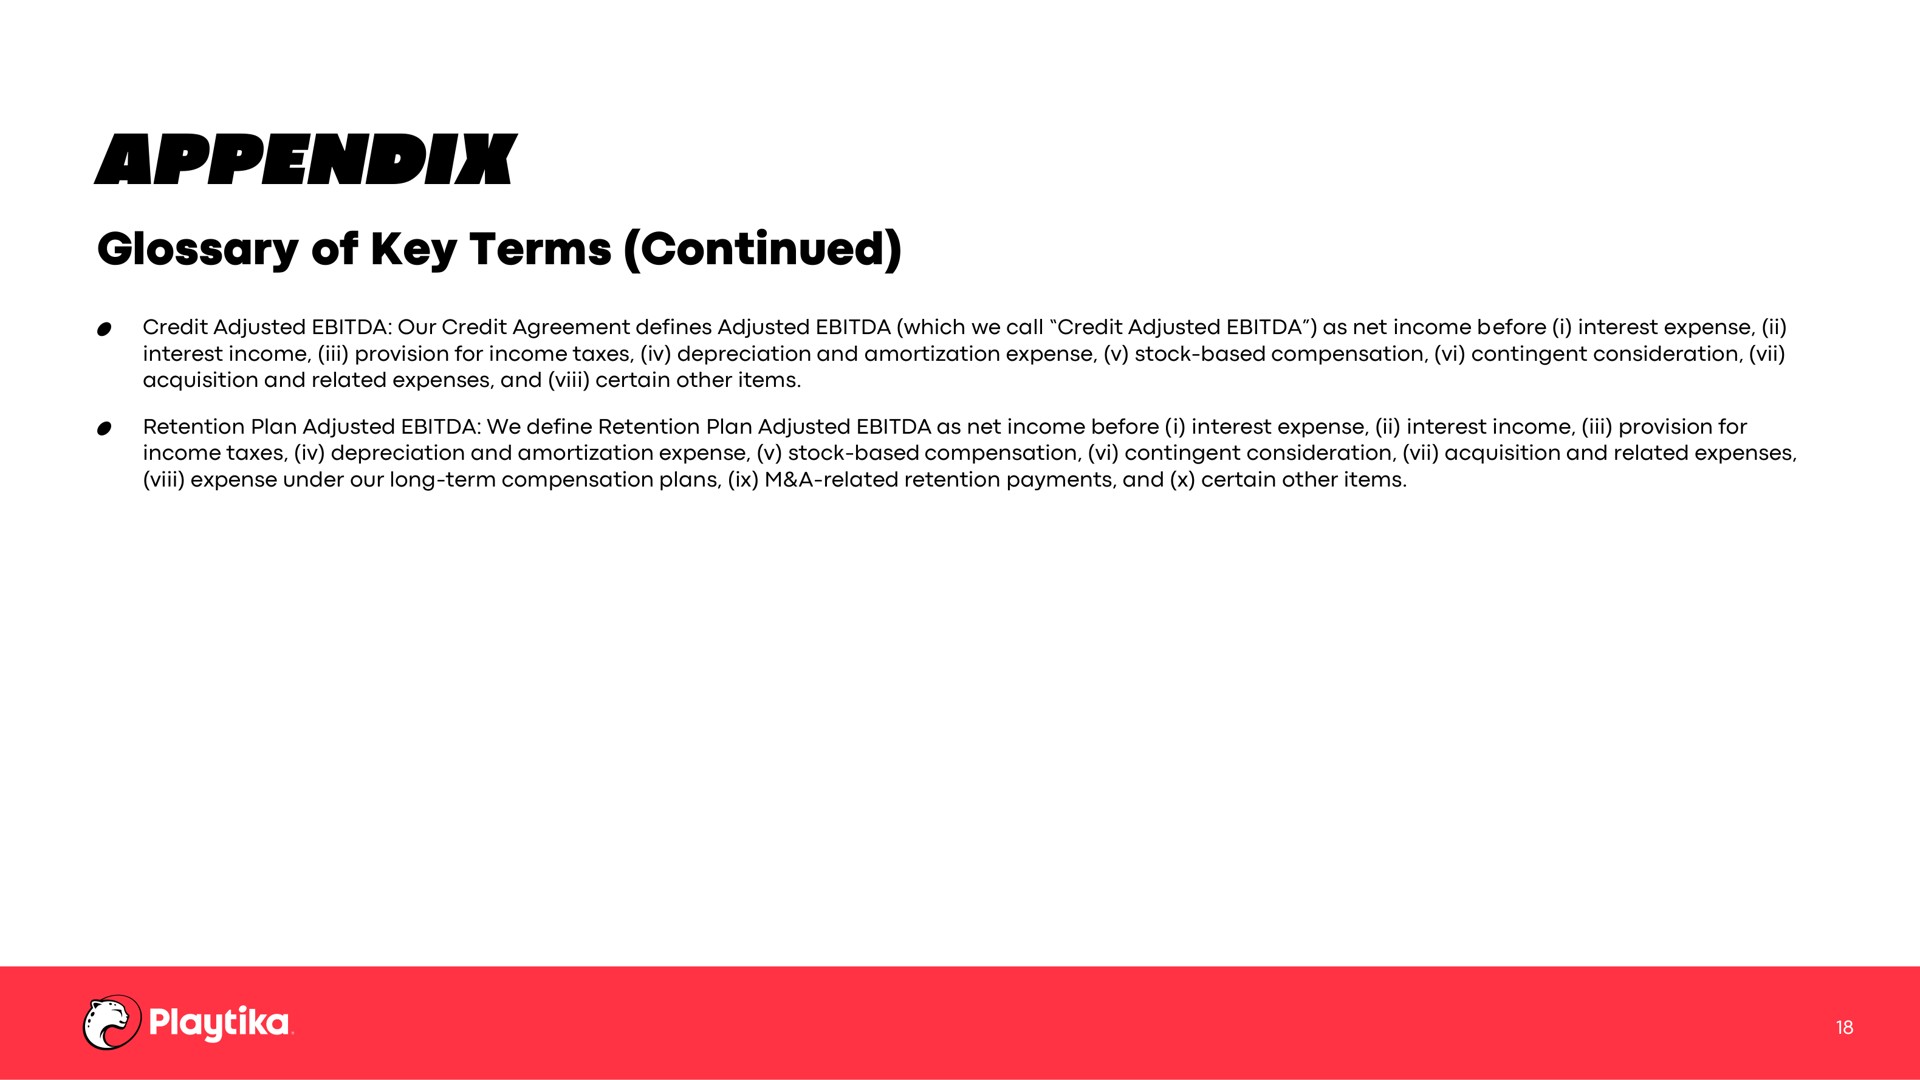 appendix glossary of key terms continued | Playtika